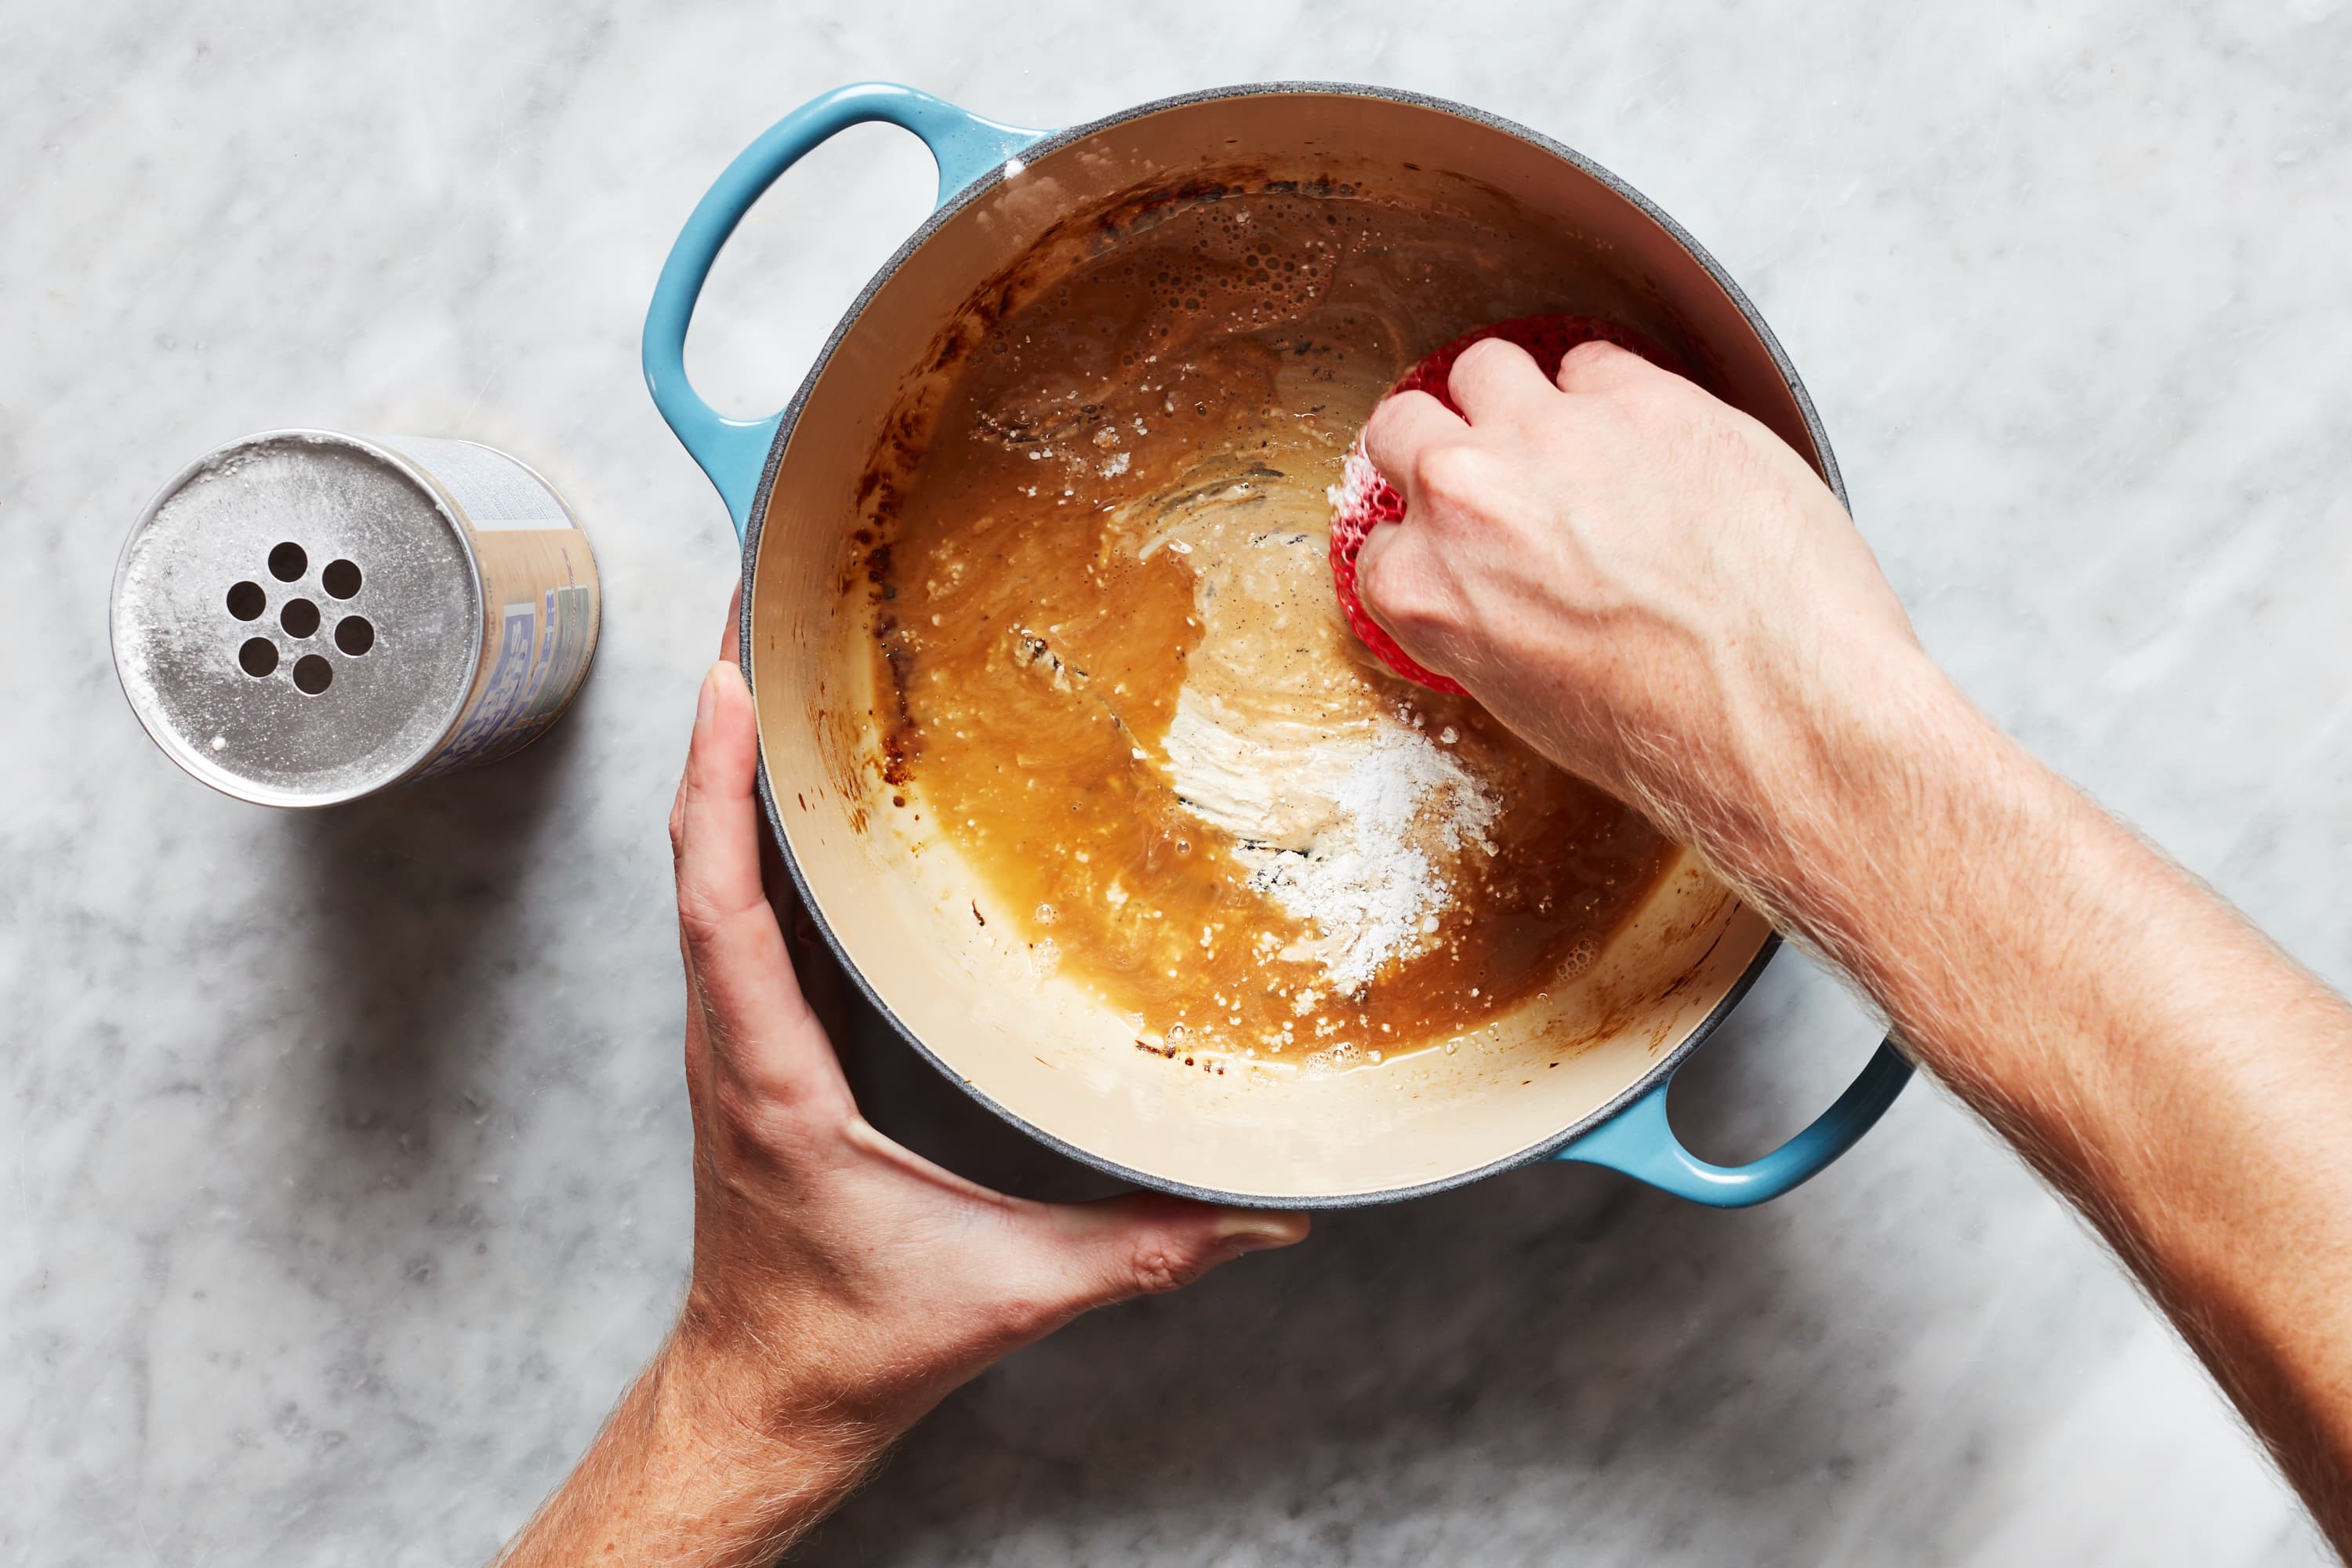 10 Crucial Tips For Cleaning Your Dutch Oven